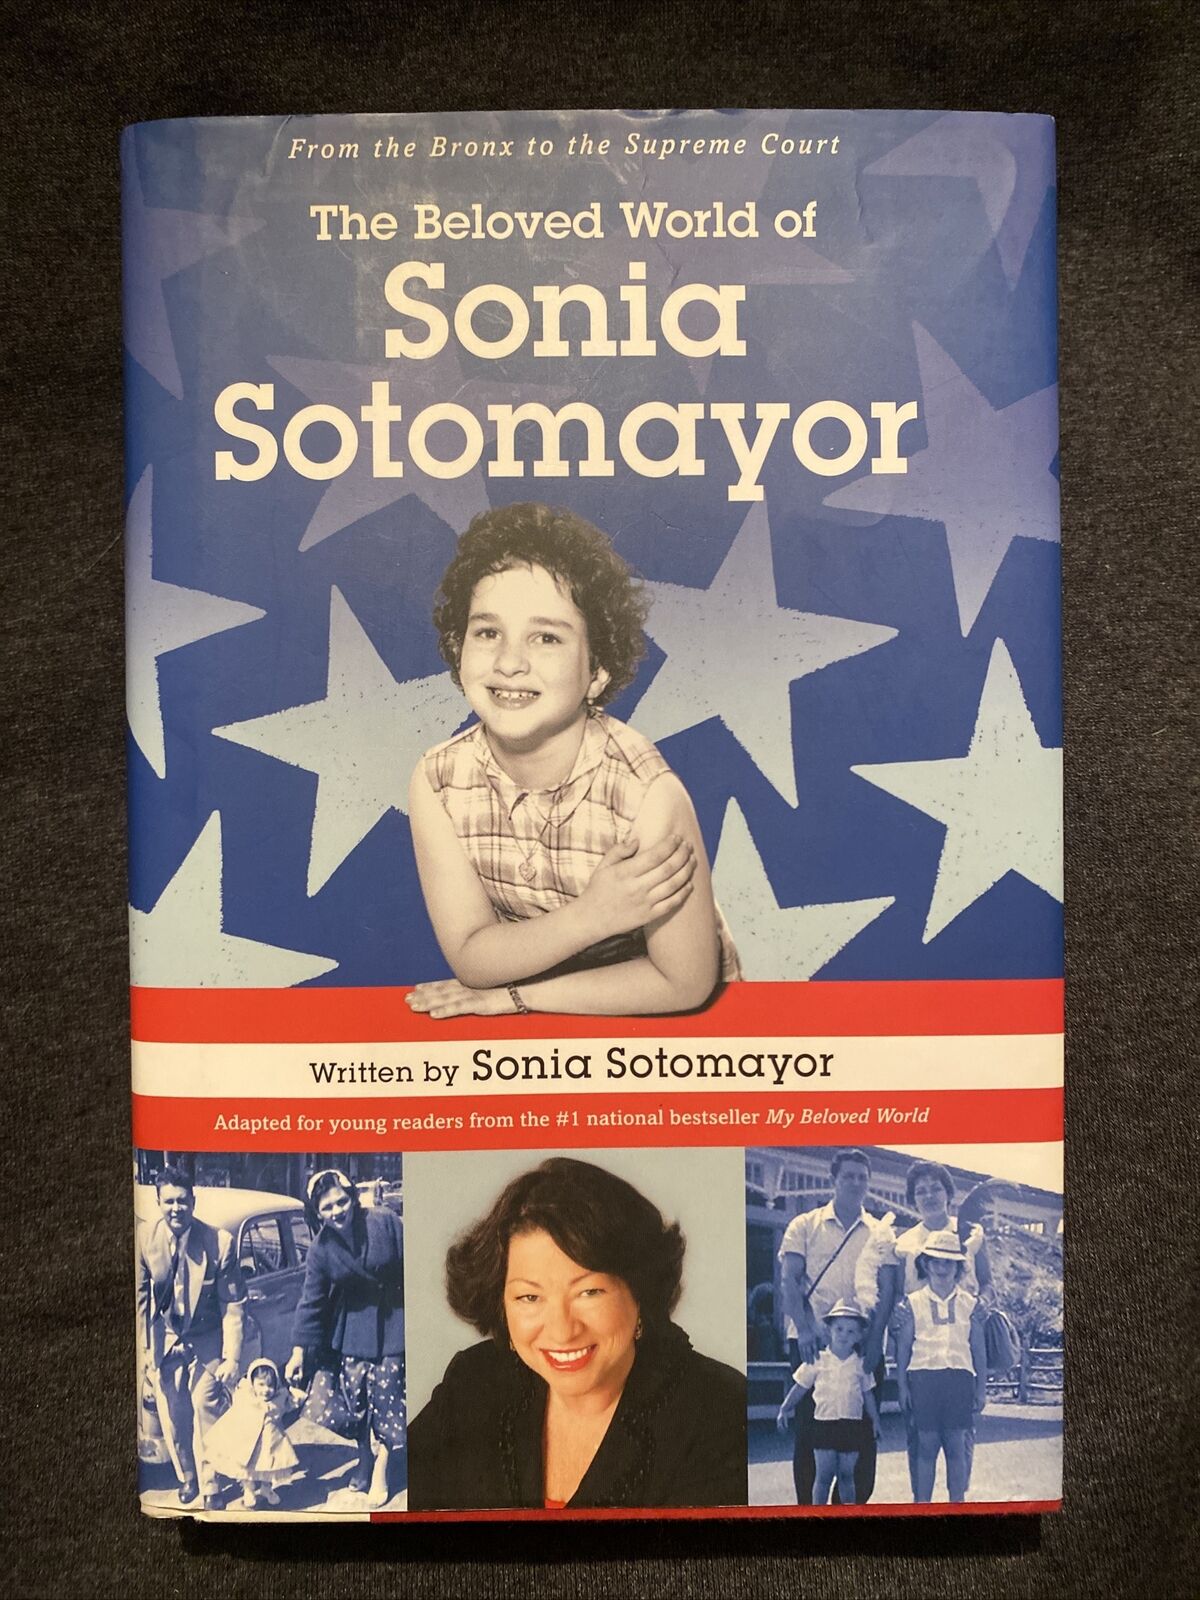 Sonia Sotomayor *SIGNED* The Beloved World of Sonia - US Supreme Court Justice